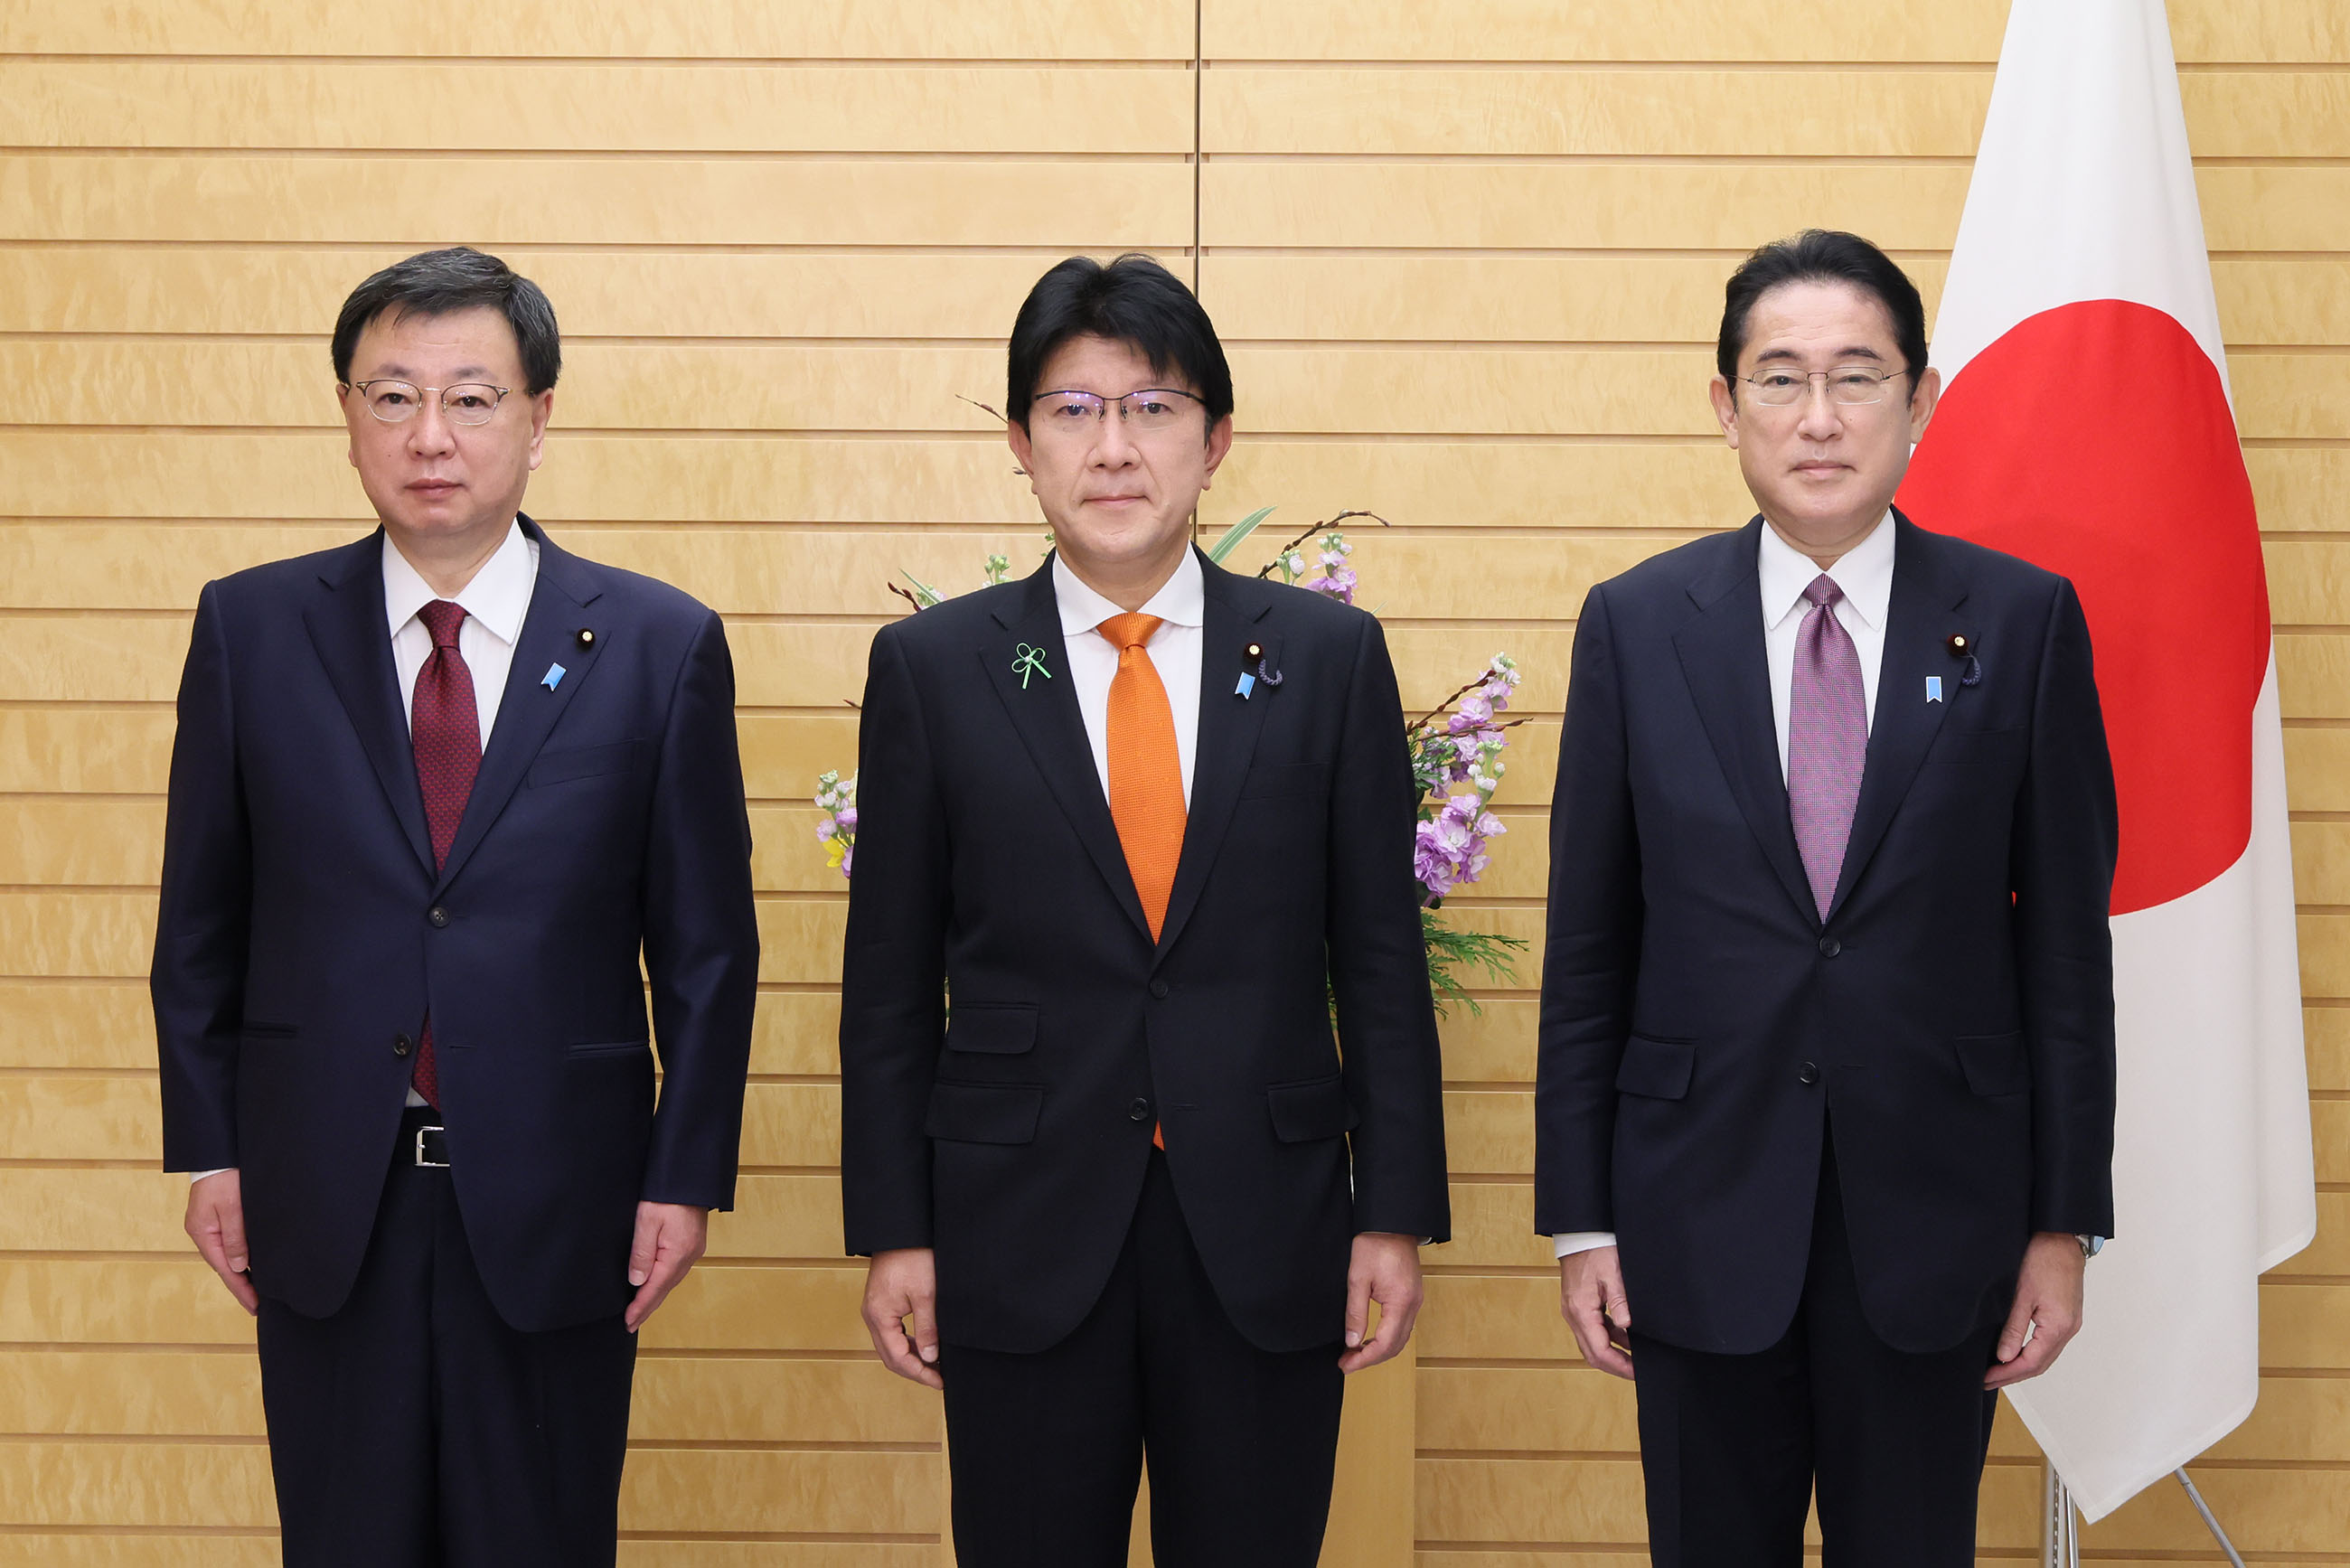 Prime Minister Kishida attending a photograph session with the newly appointed Parliamentary Vice-Minister Hasegawa (3)